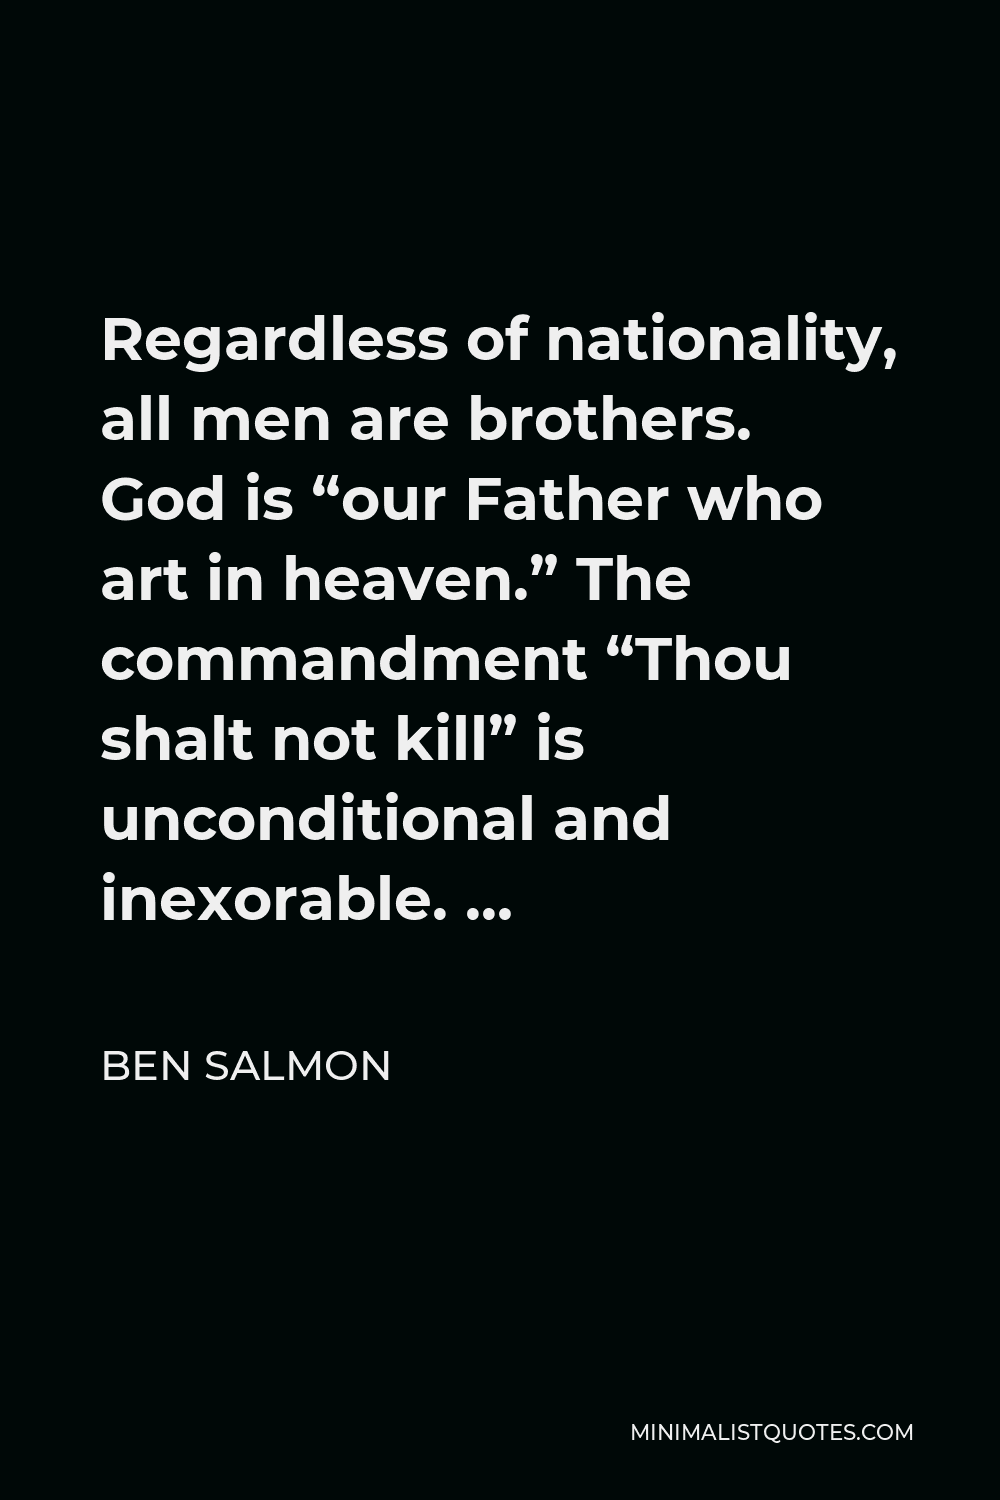 Ben Salmon Quote - Regardless of nationality, all men are brothers. God is “our Father who art in heaven.” The commandment “Thou shalt not kill” is unconditional and inexorable. …